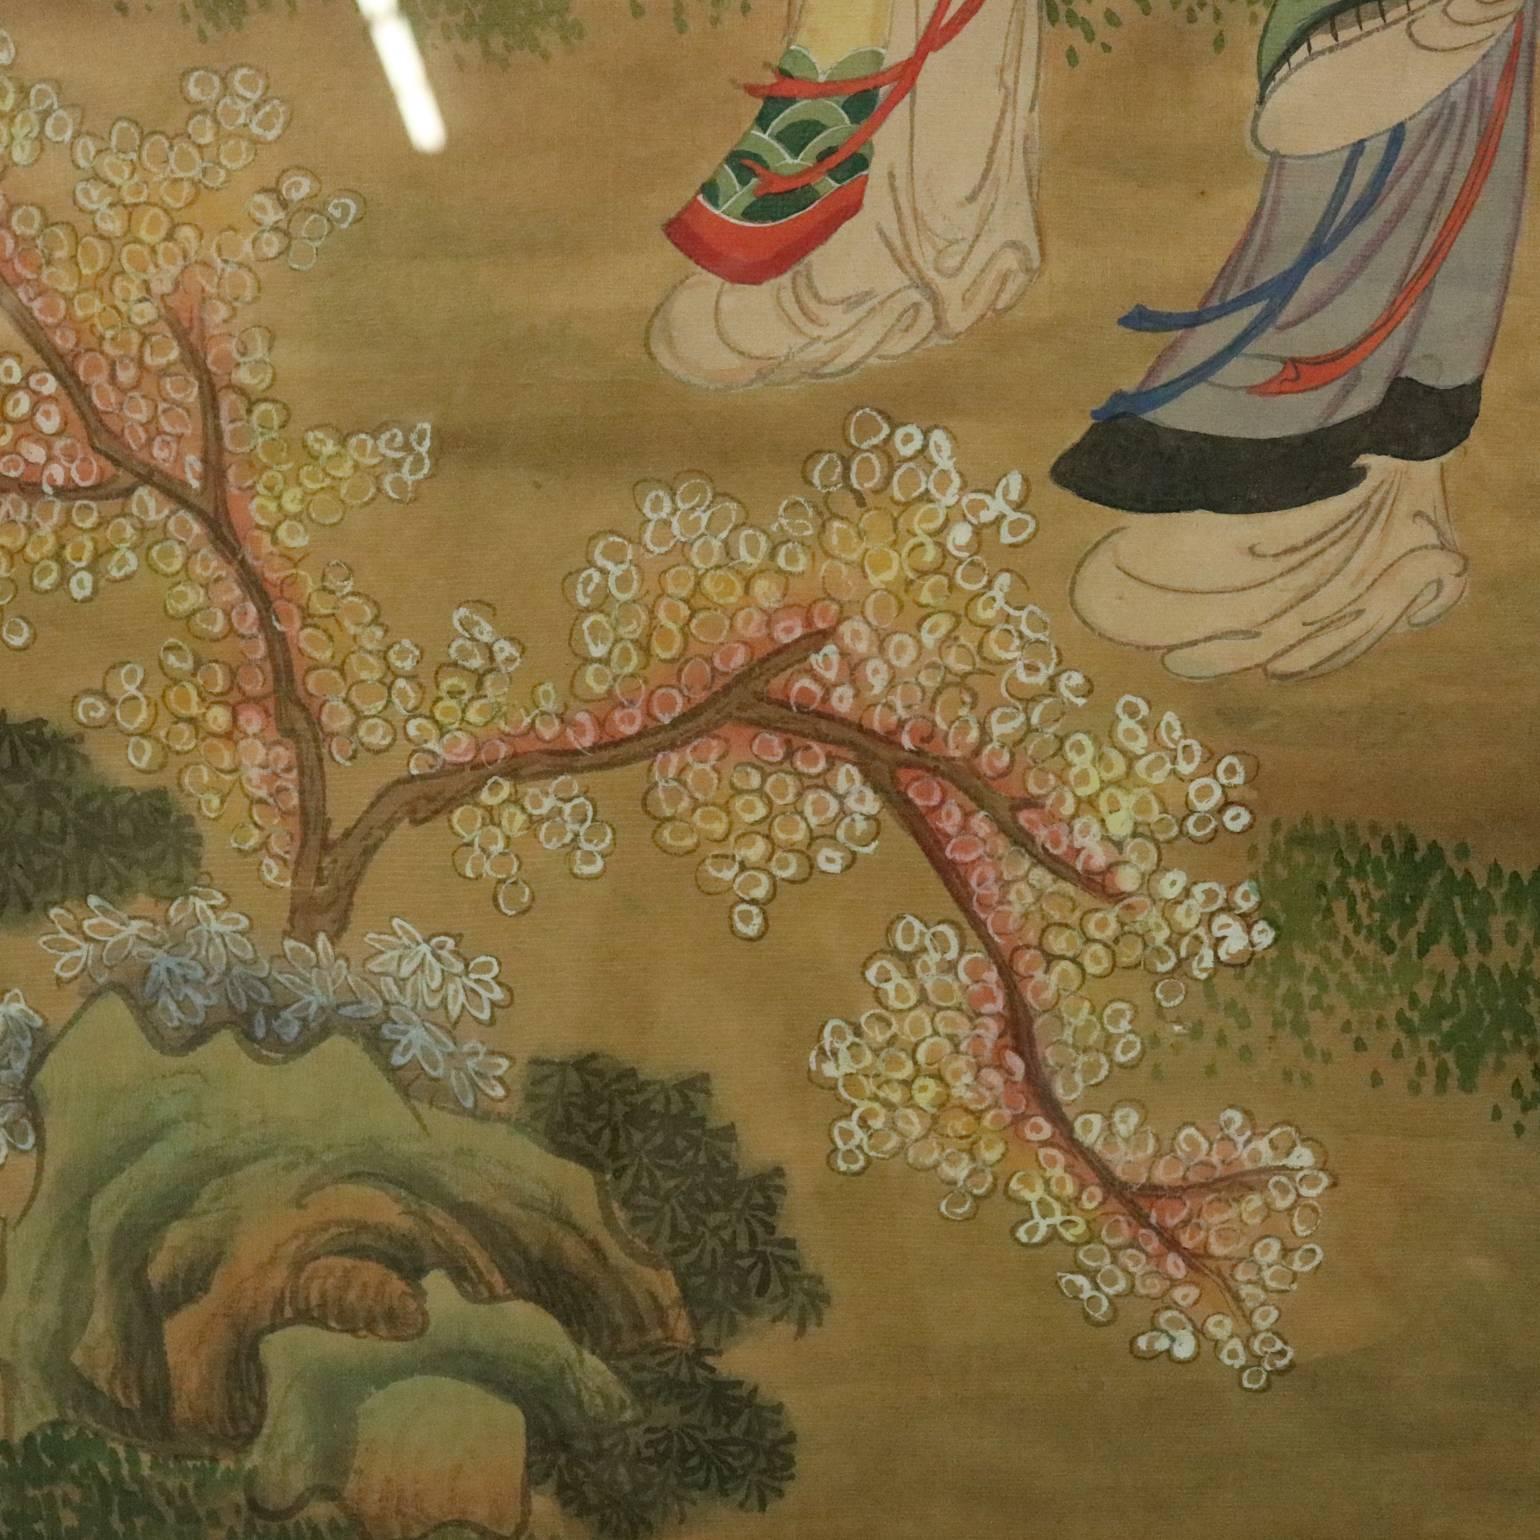 Hand-Painted Late 19th Century/early 20th century Antique Chinese Watercolor Painting